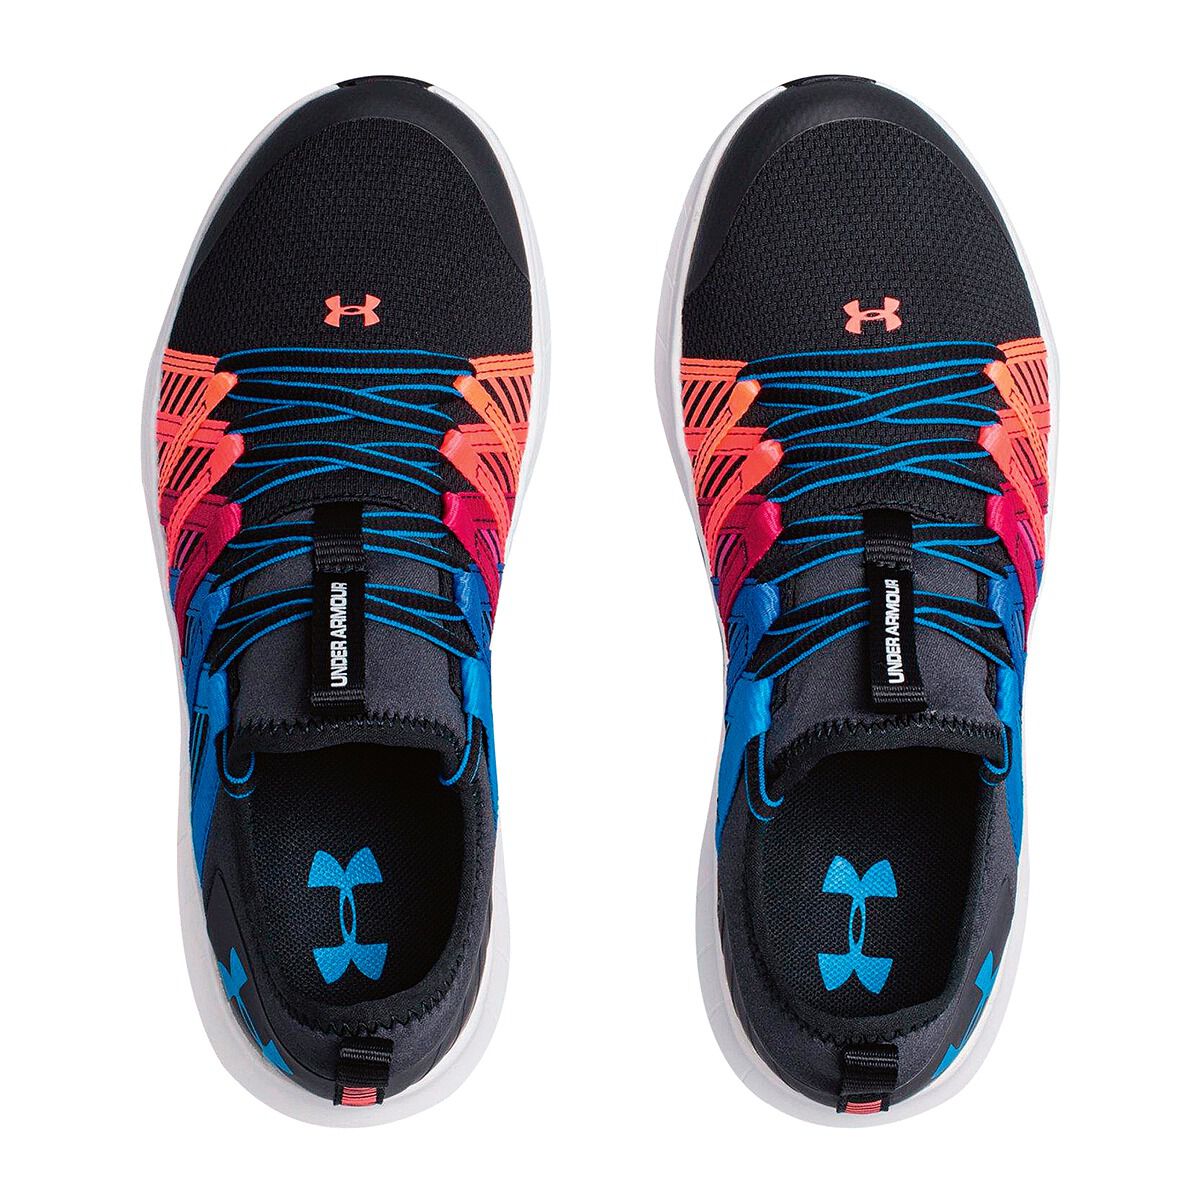 under armor infinity shoes